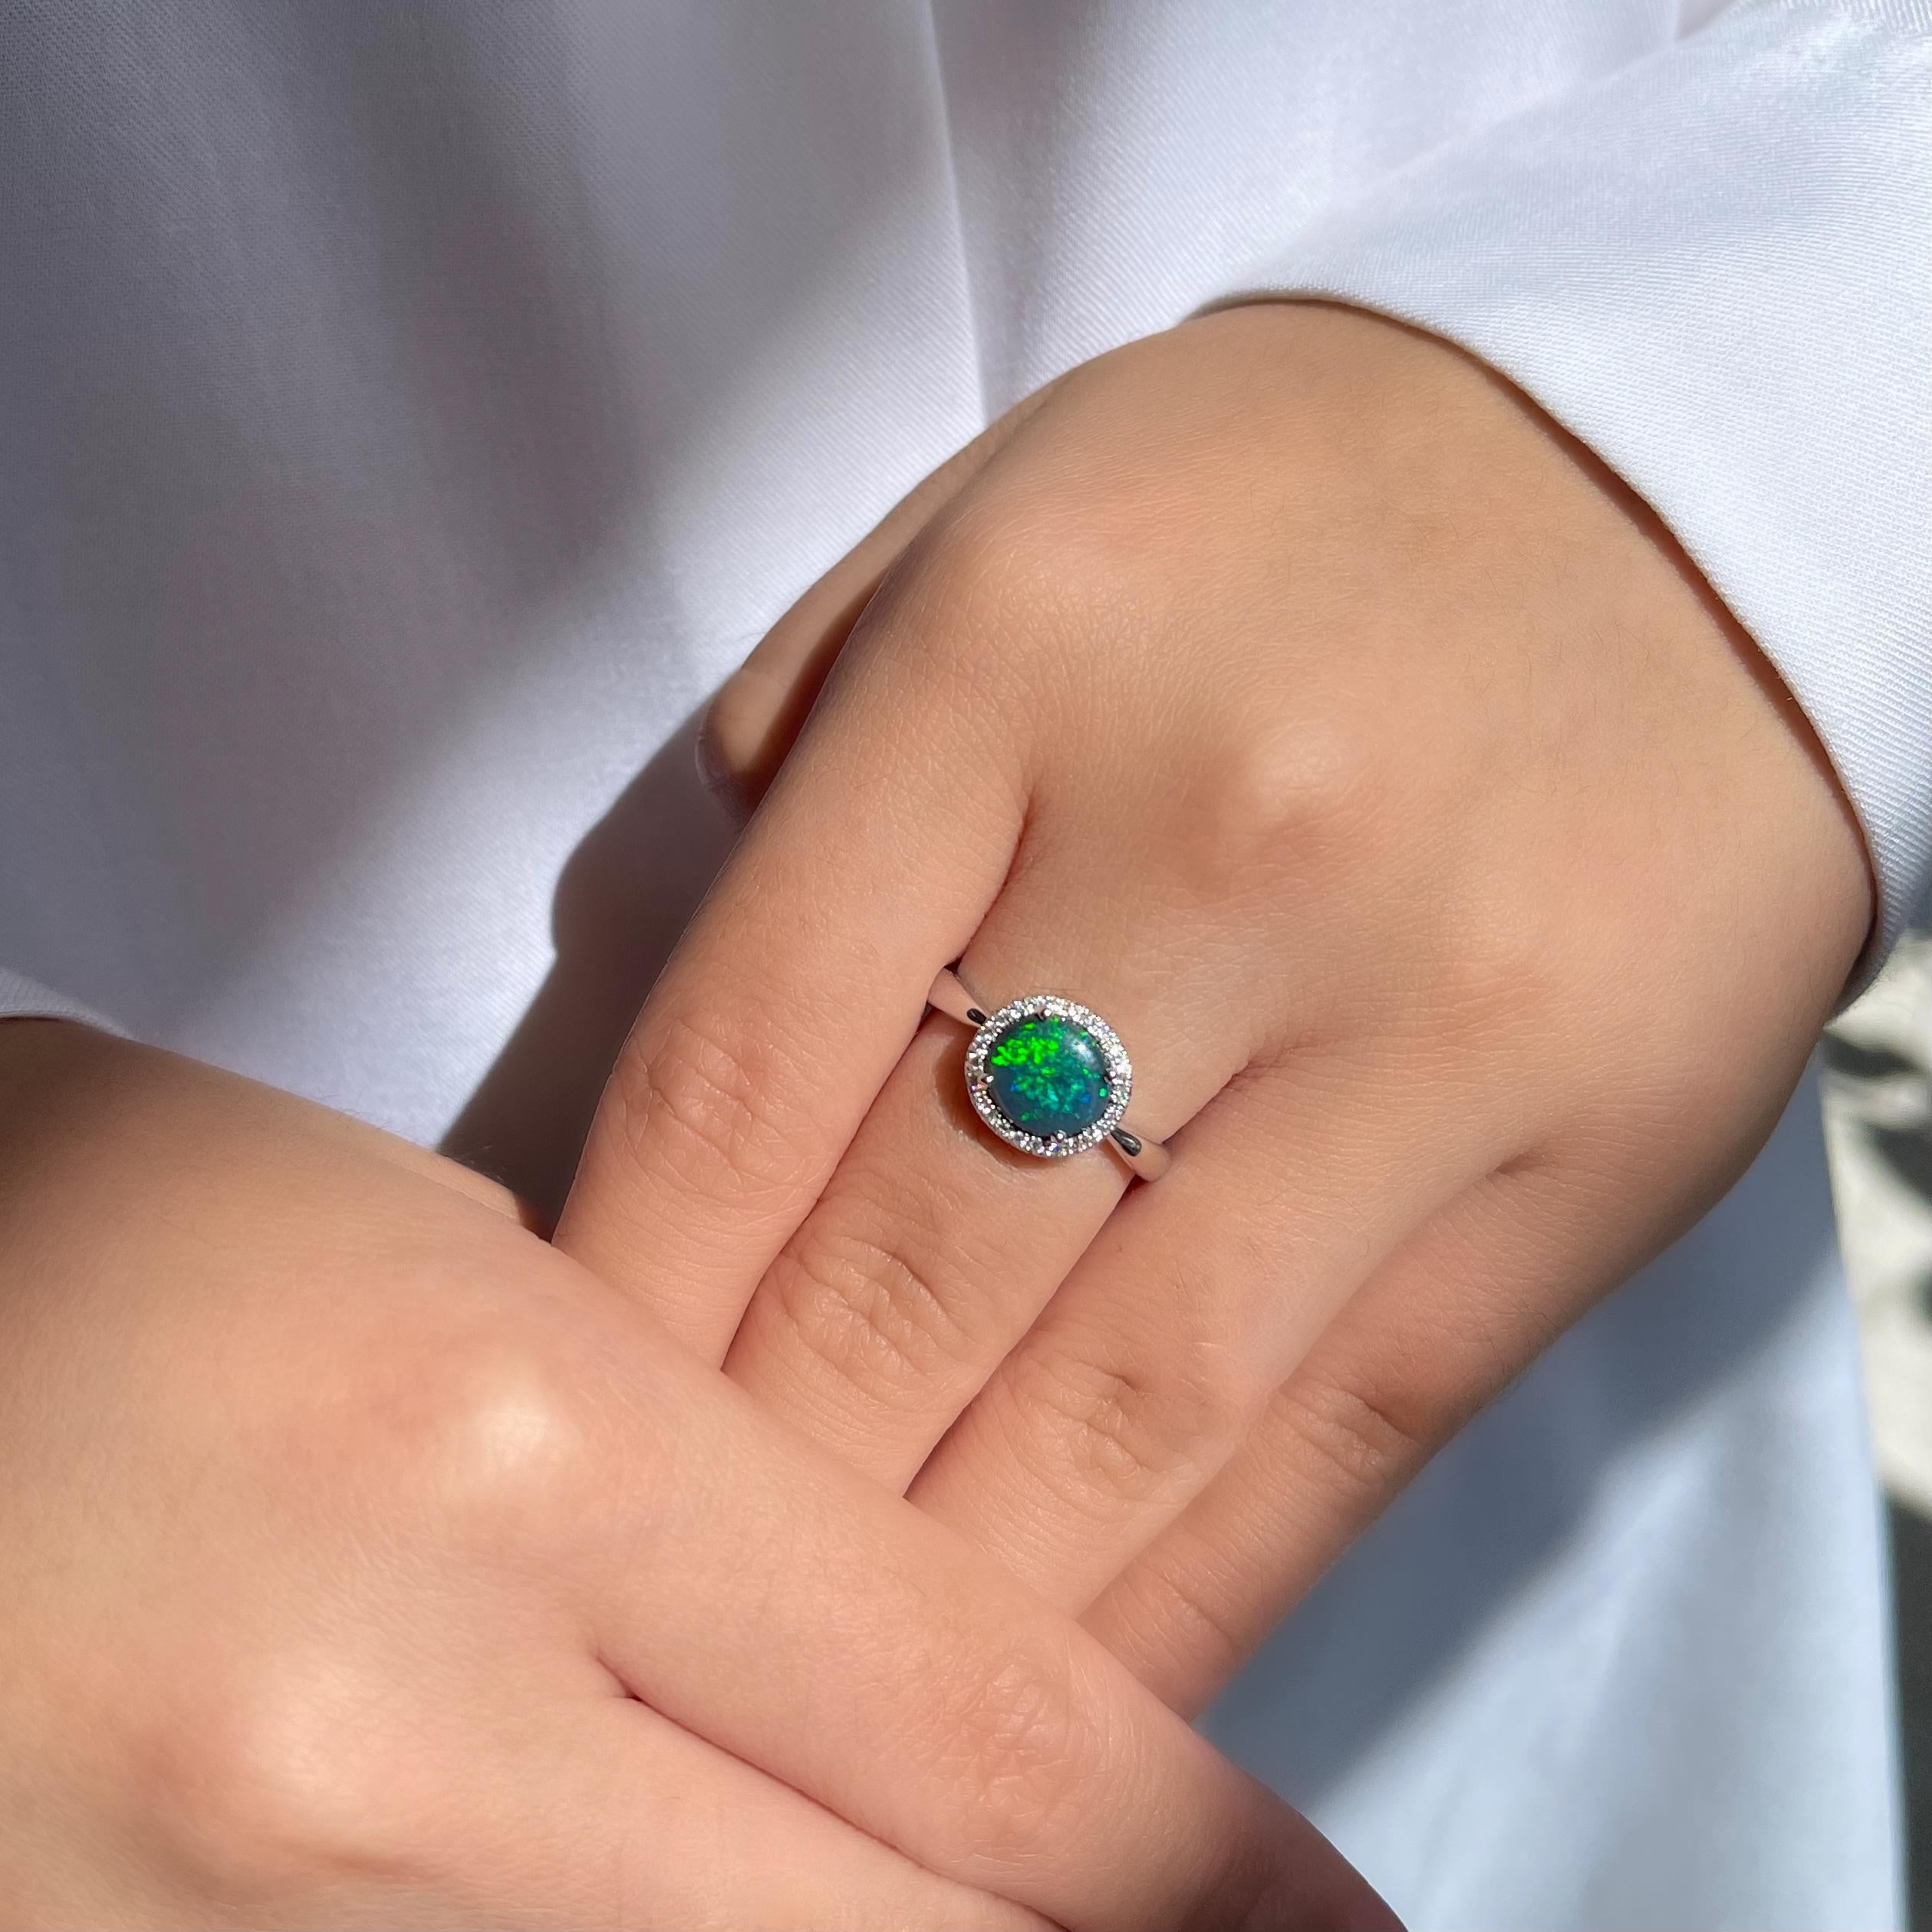 Delightful and gorgeous, the ‘I Love You’ opal ring features a wonderful black opal (1.40ct) ethically sourced from Lightning Ridge opal mines, NSW, Australia. The alluring and gracious hues of emerald and green play-of-colour of the opal is bound